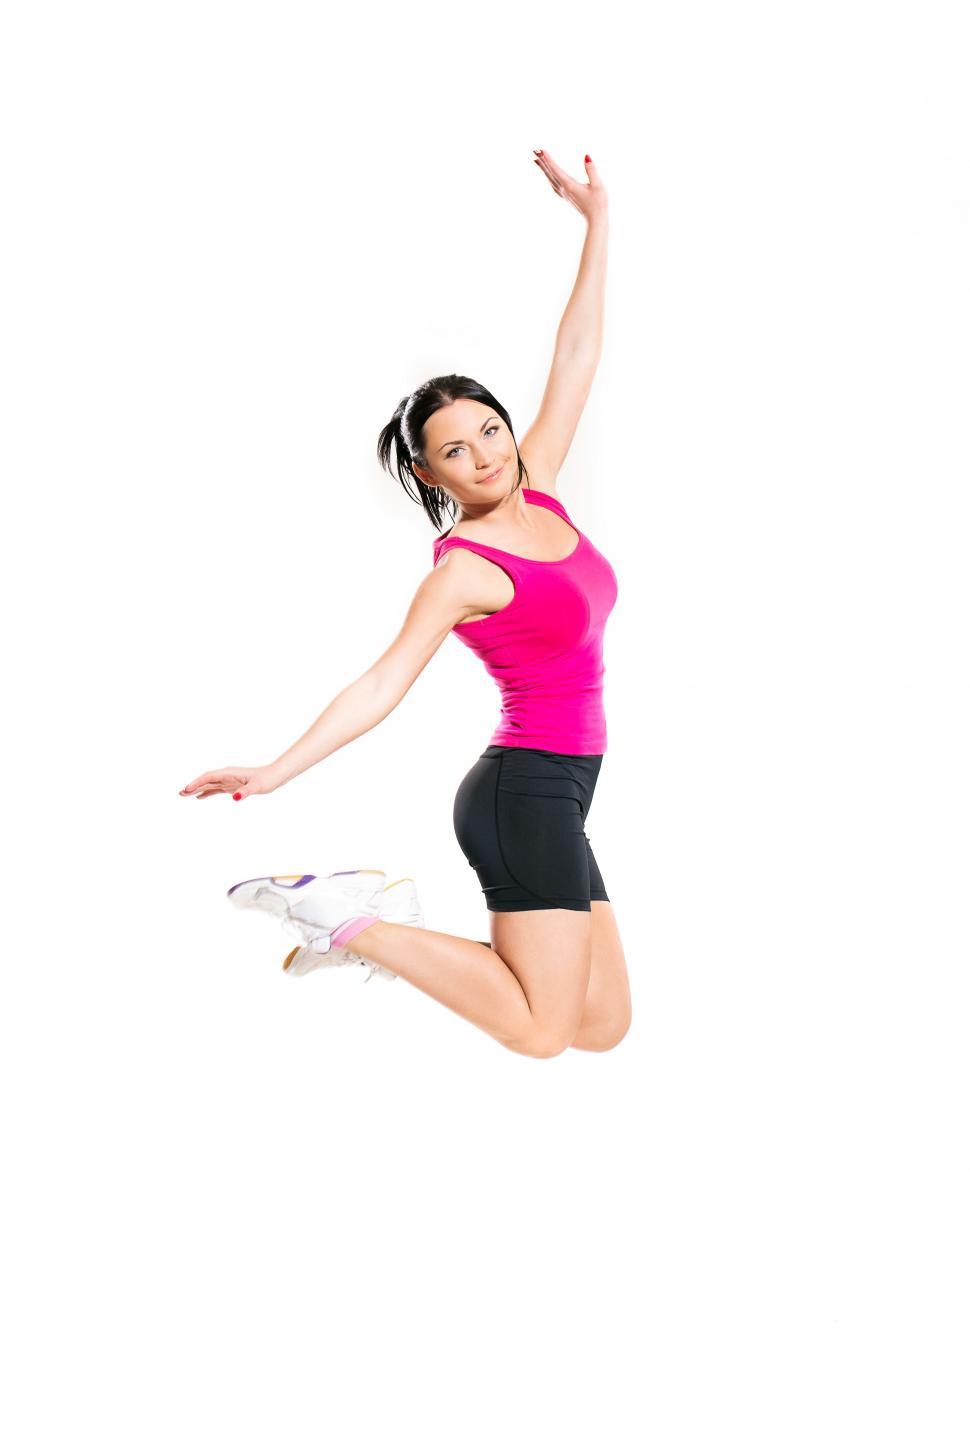 Free Image of Brunette on a white background leaping 